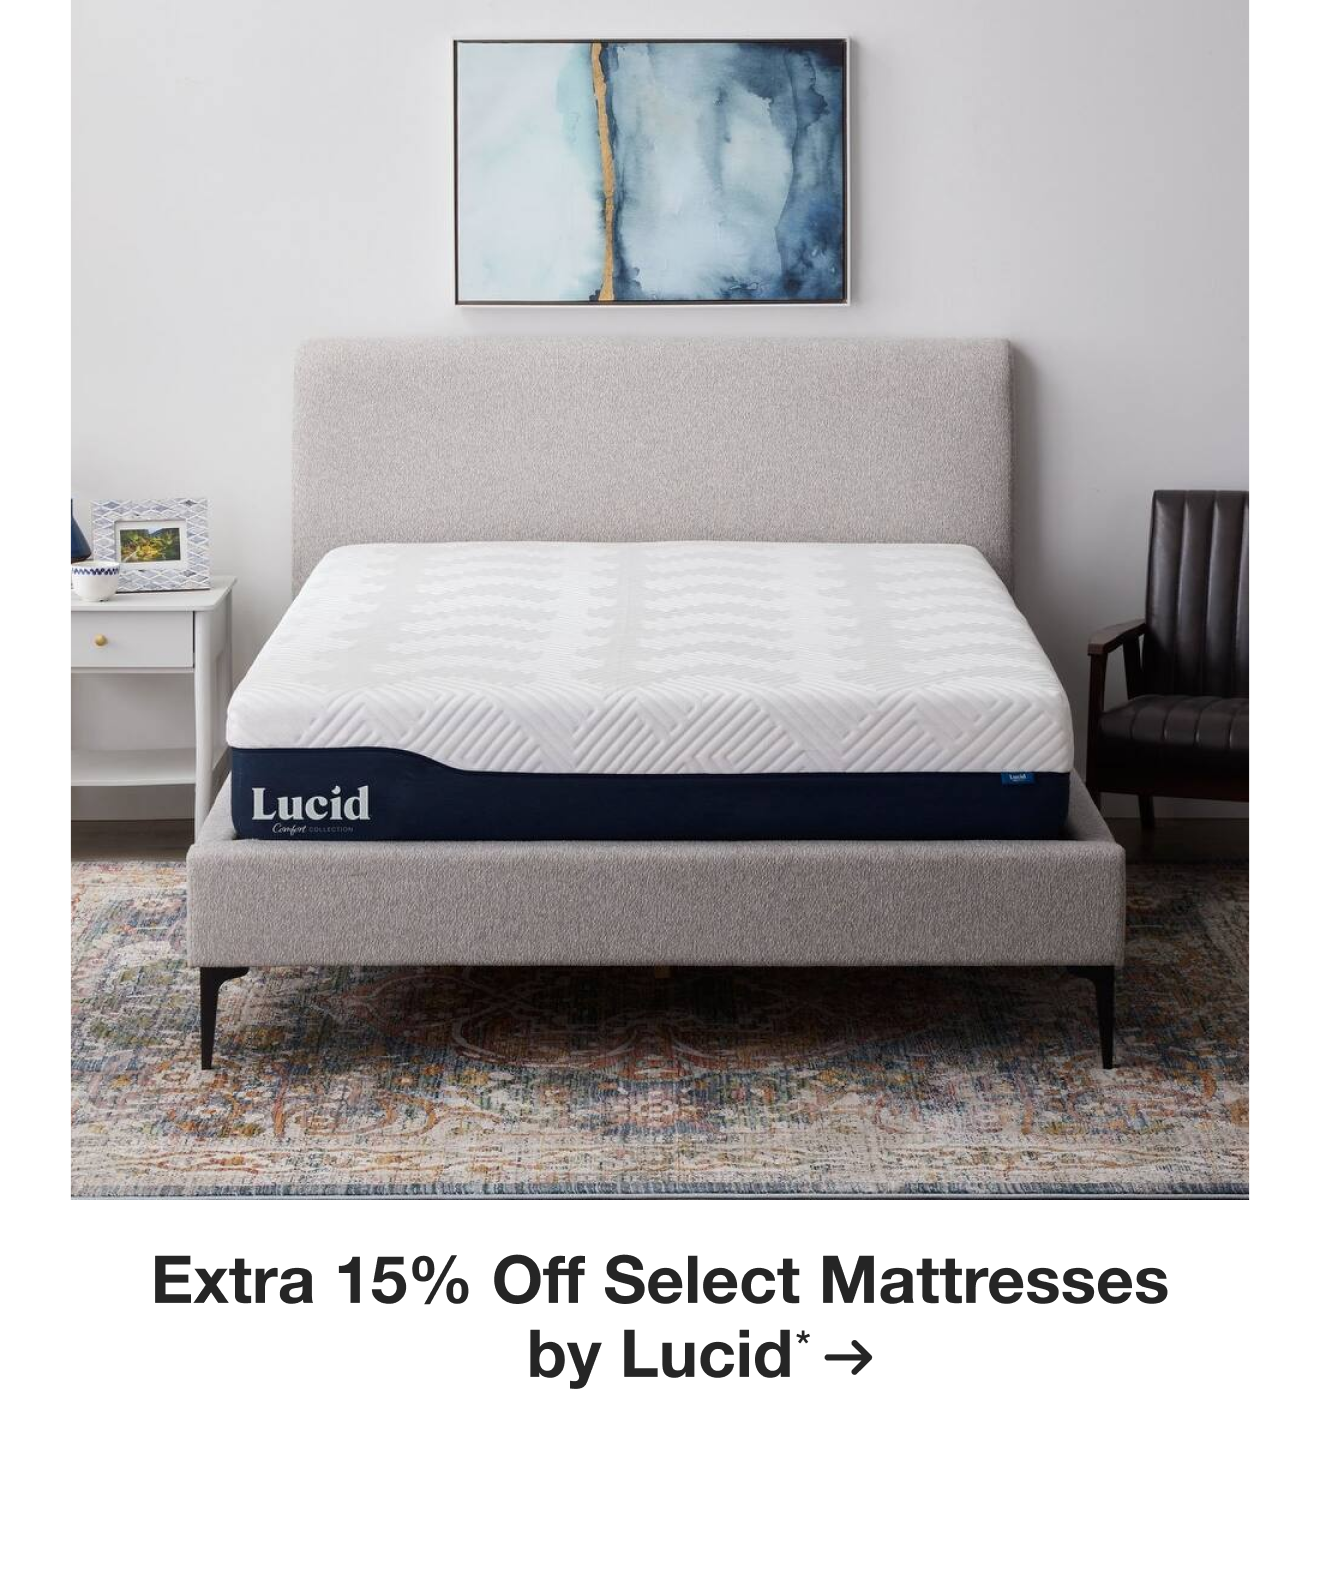 Extra 15% Off Select Matresses by Lucid*